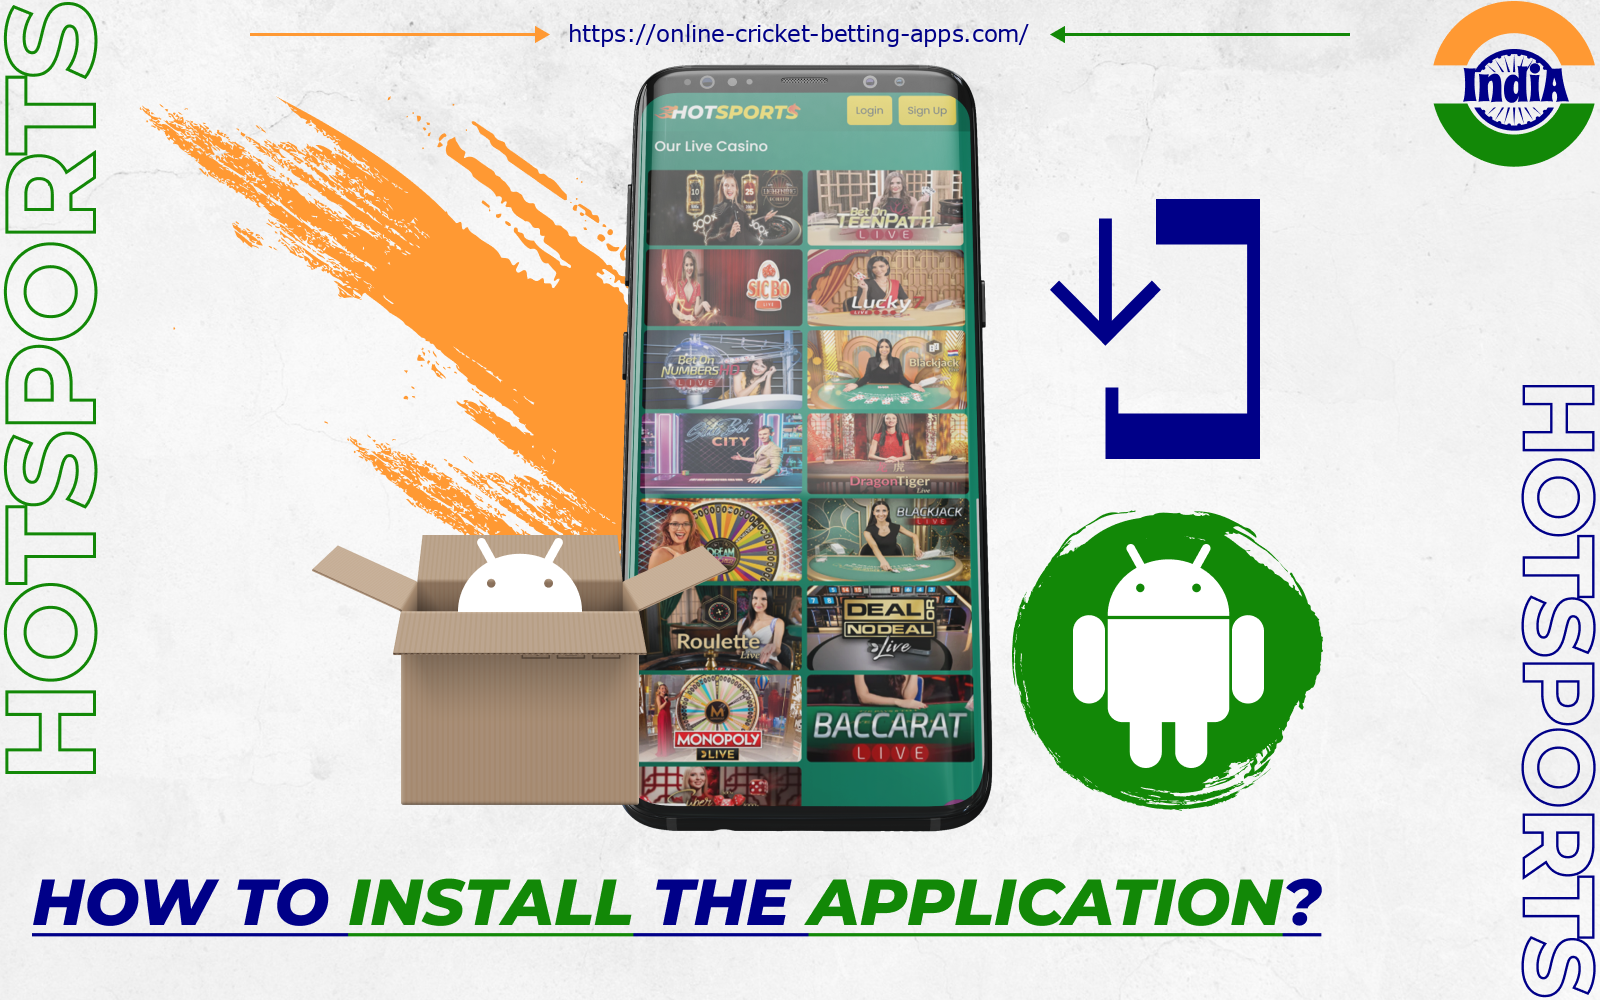 After downloading the Hotsports APK, players from India can start installing the app on their smartphone